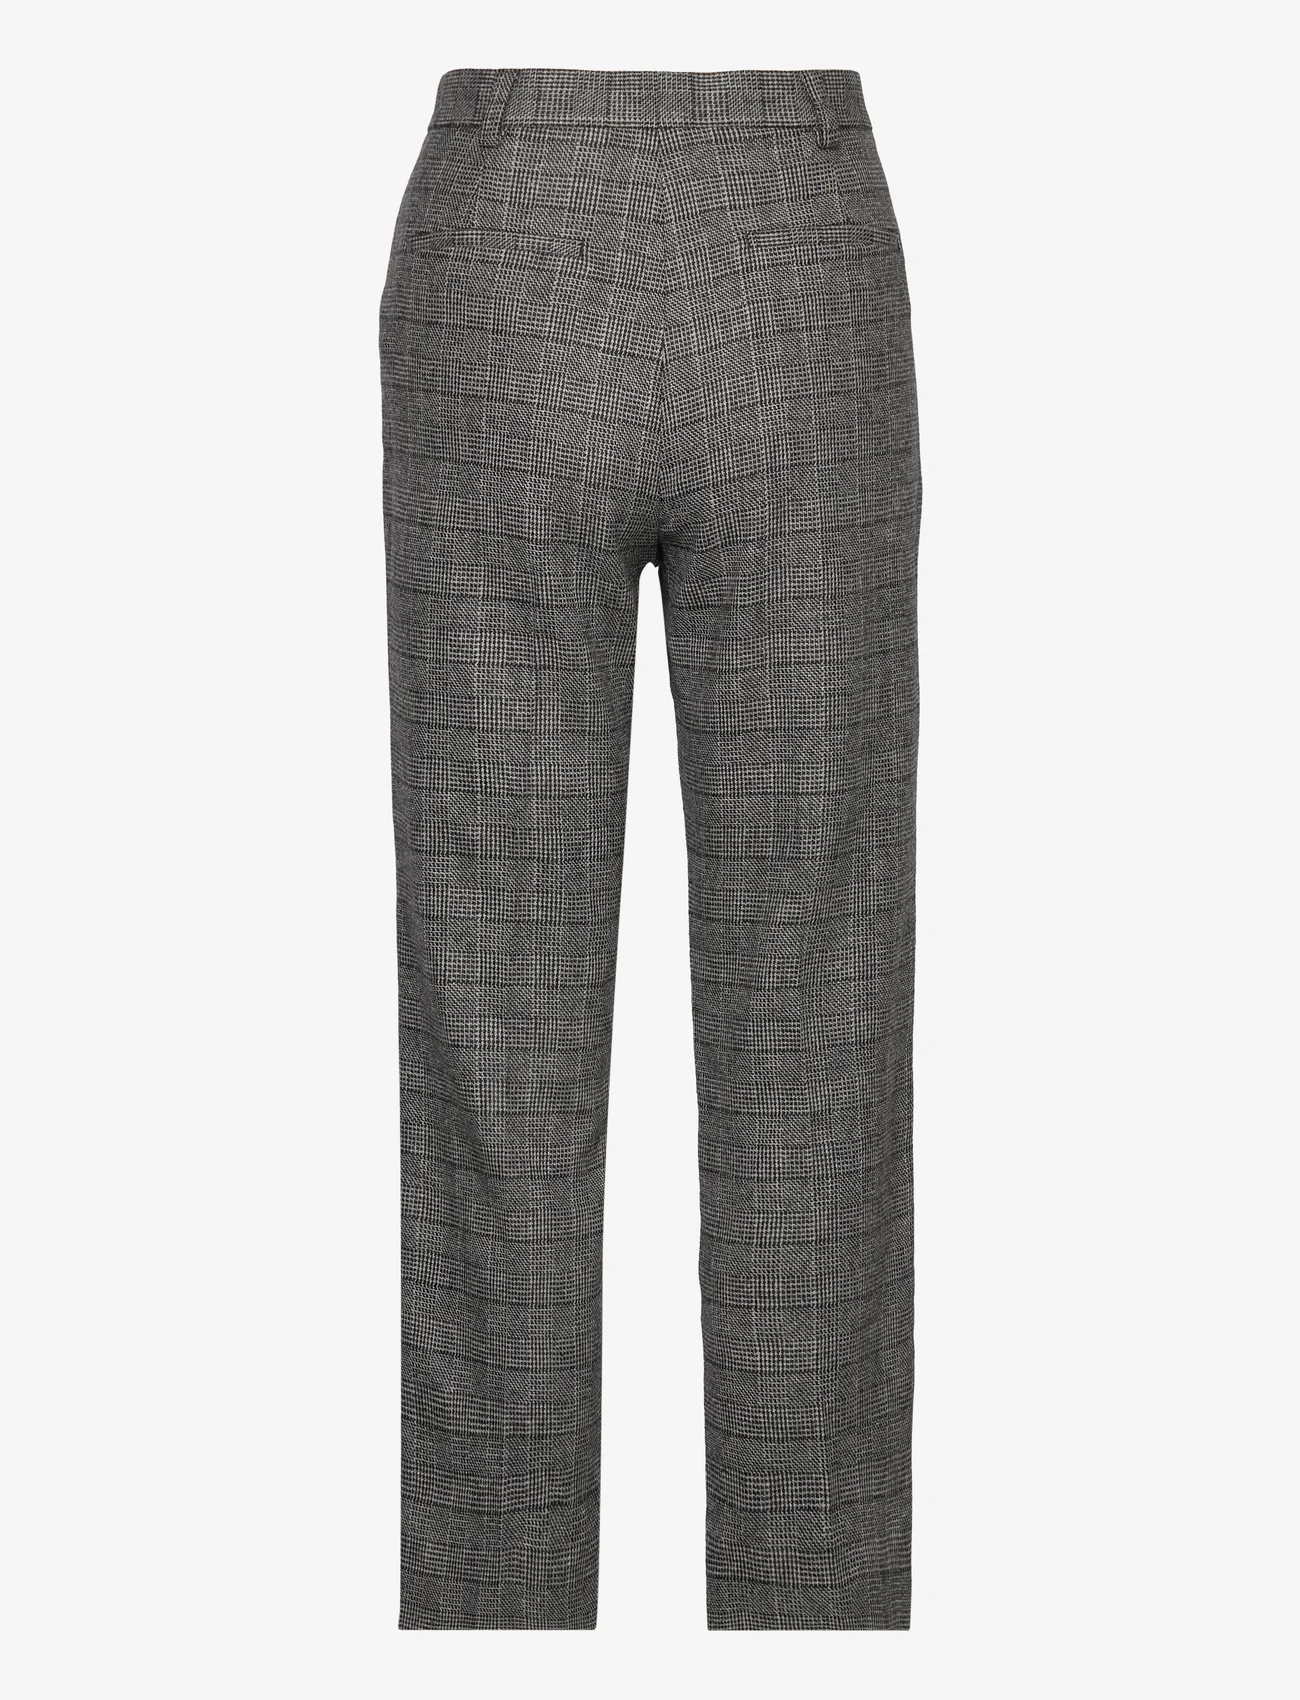 Day Birger et Mikkelsen - Classic Lady - Classic Wool Check - tailored trousers - medium grey melange - 1